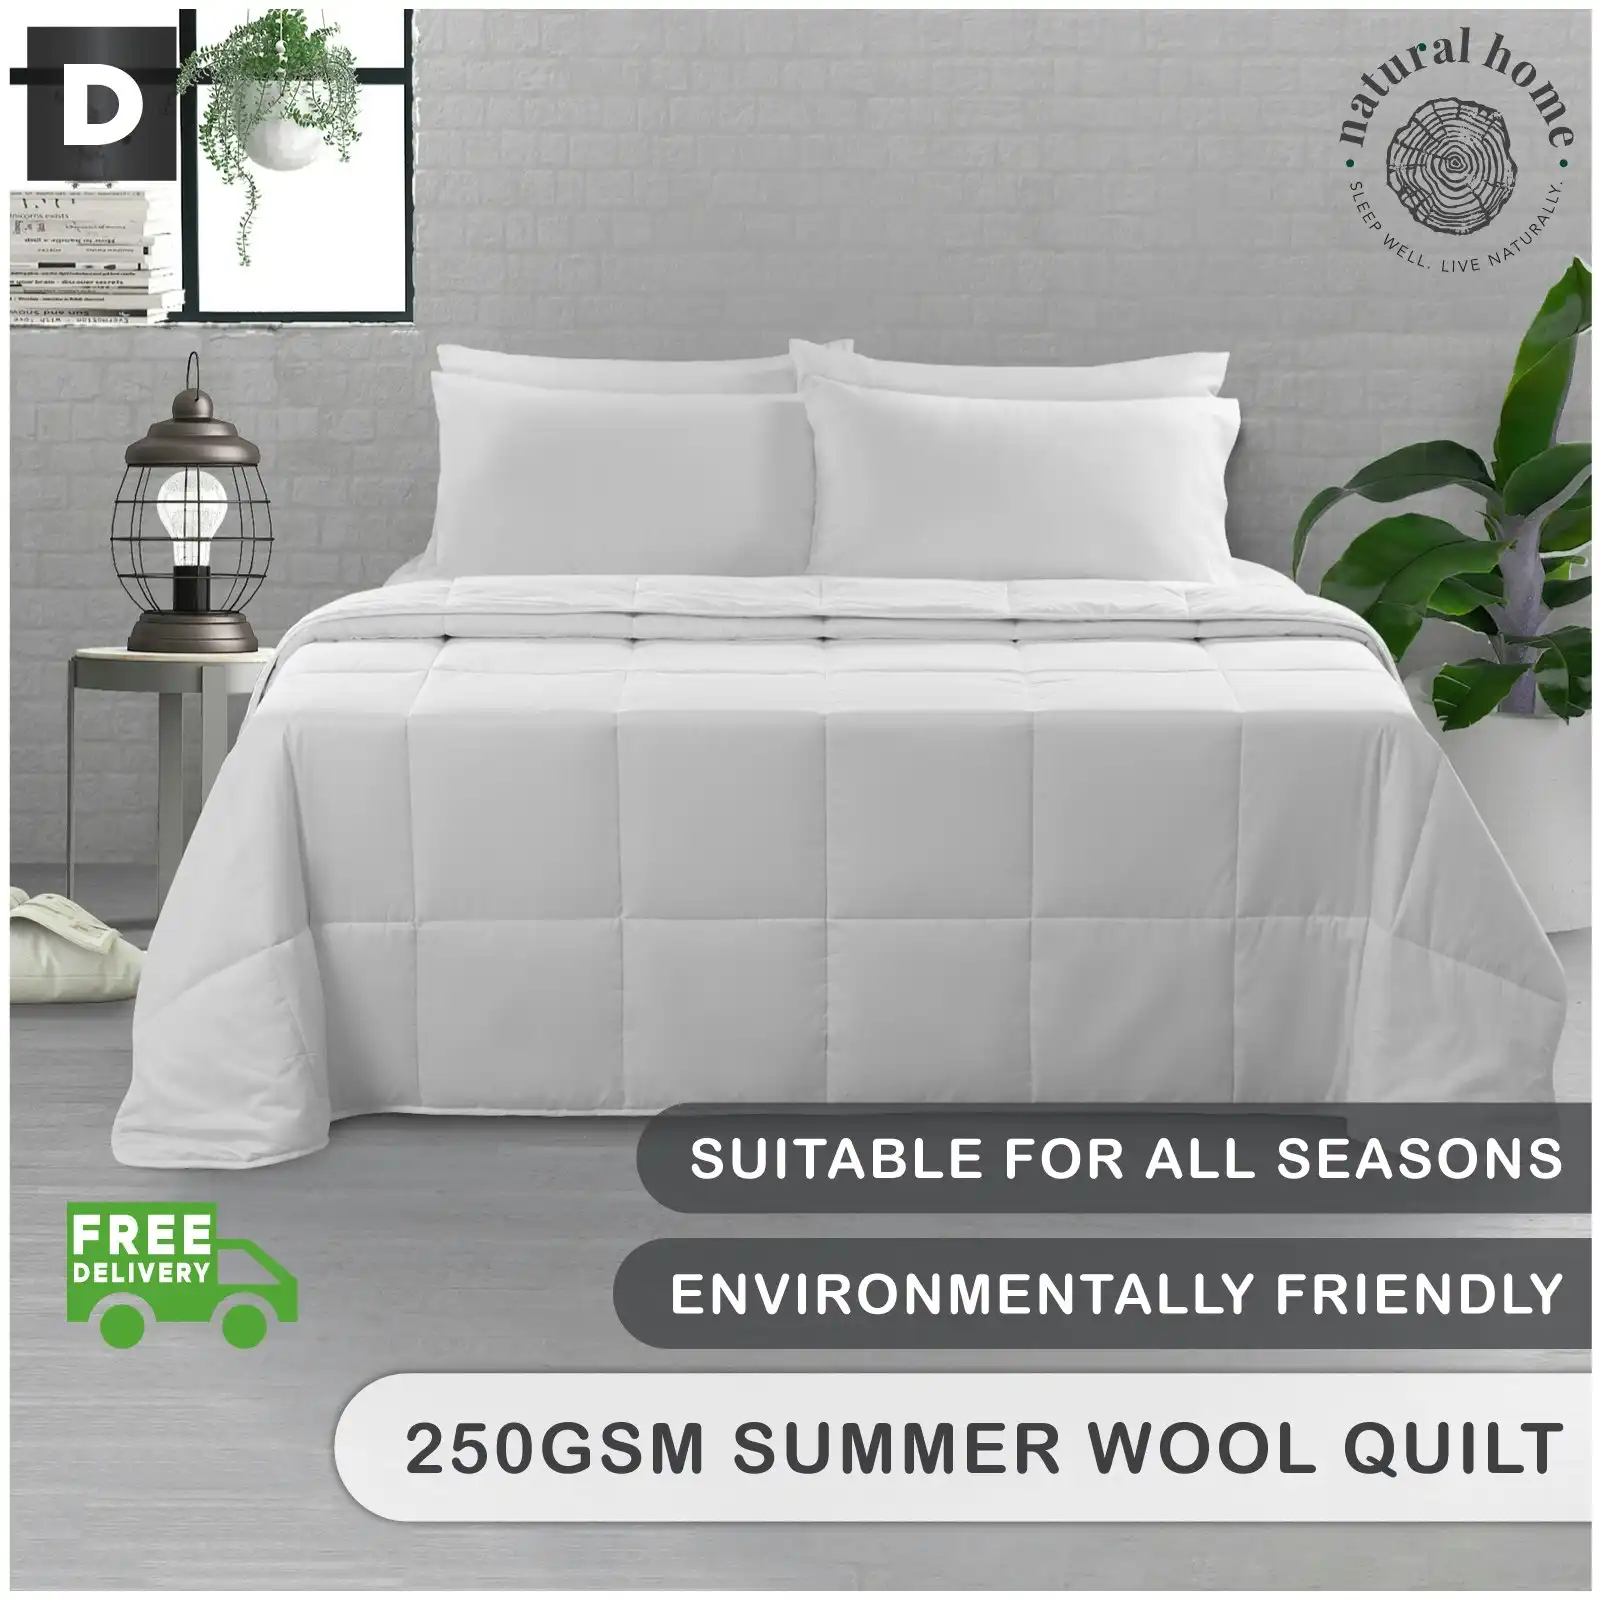 Natural Home Summer Wool Quilt 250gsm - White - Double Bed